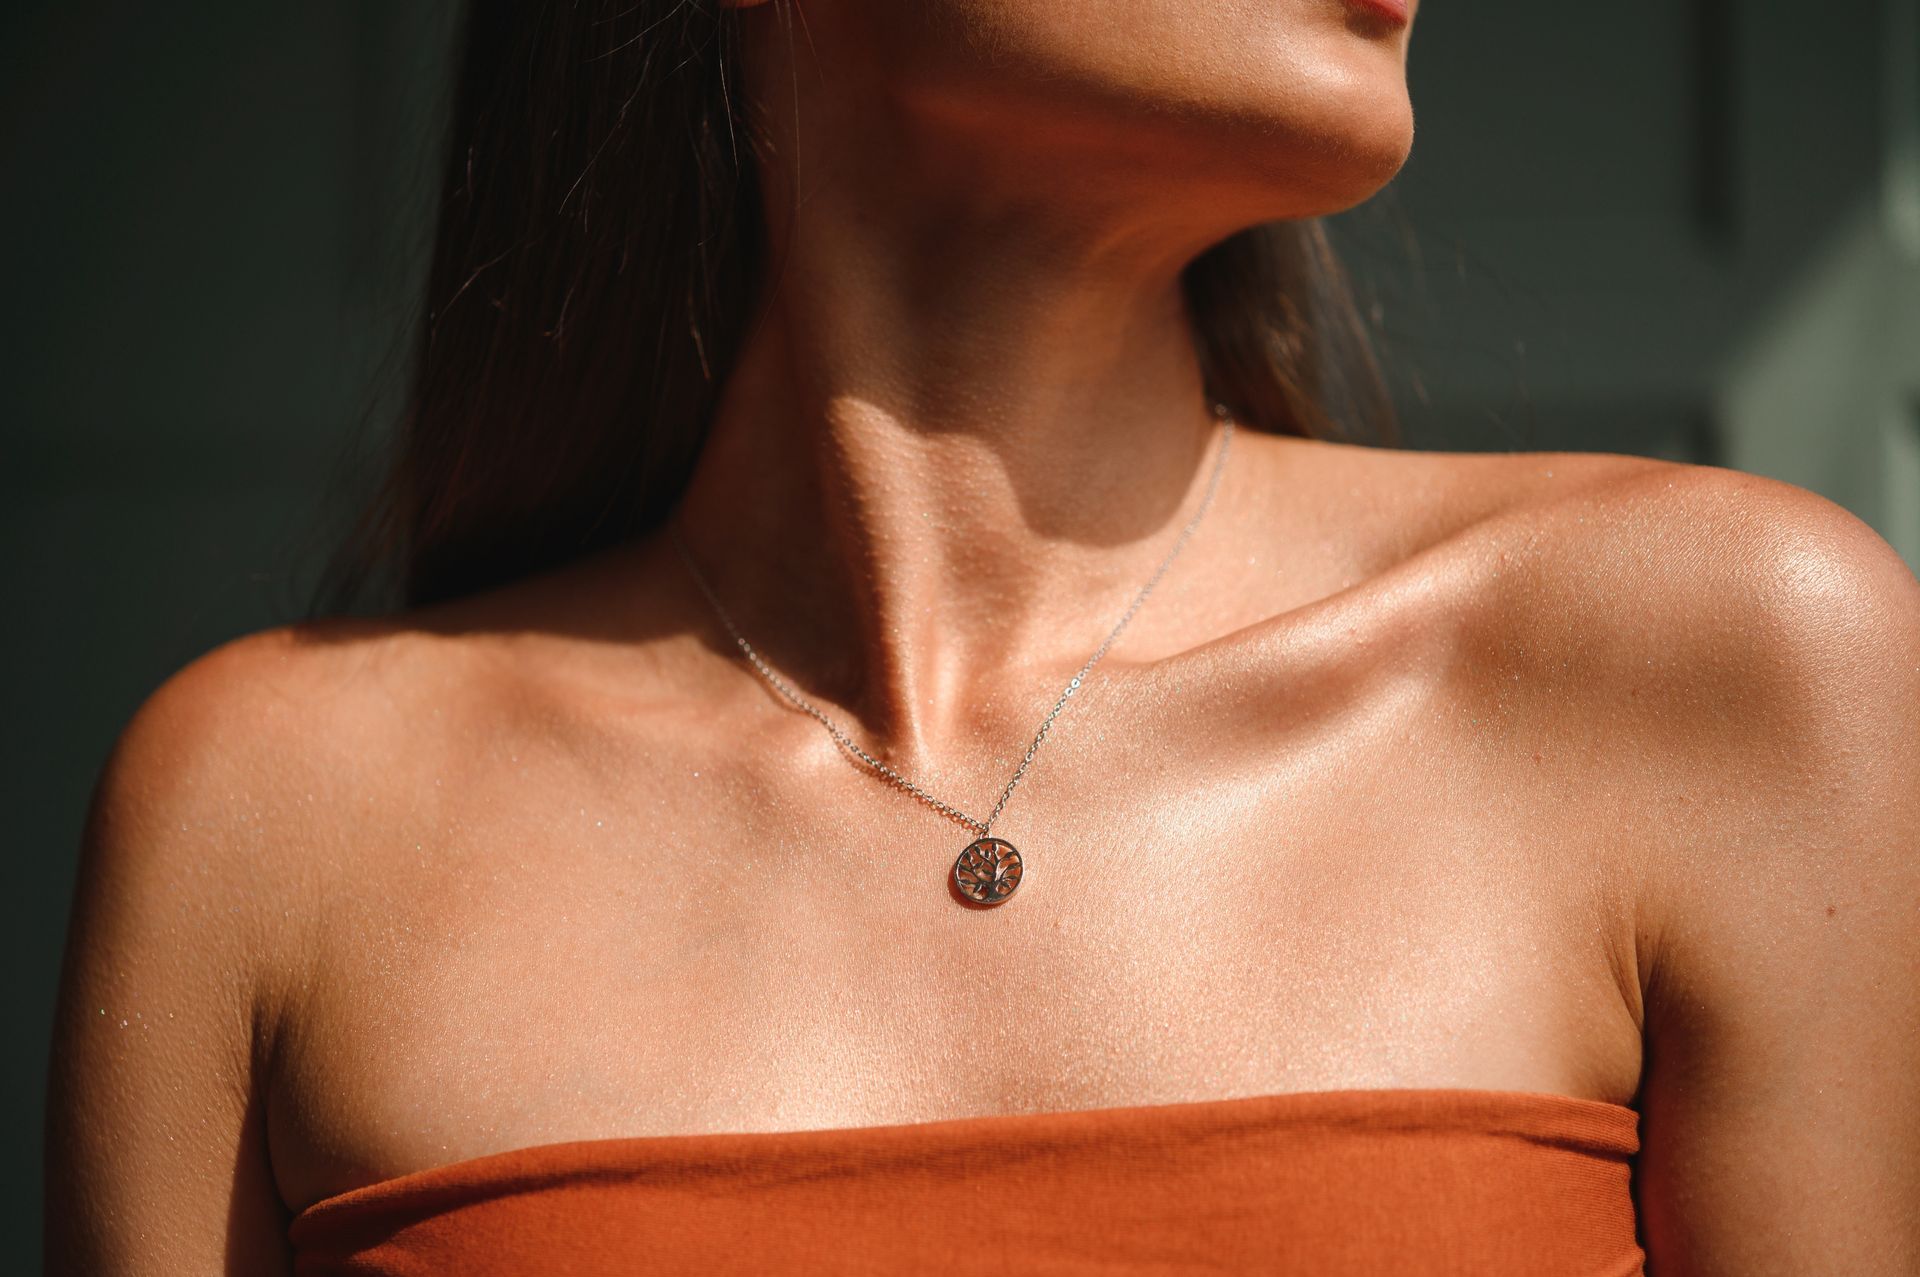 A close up of a woman 's neck and chest wearing a necklace.